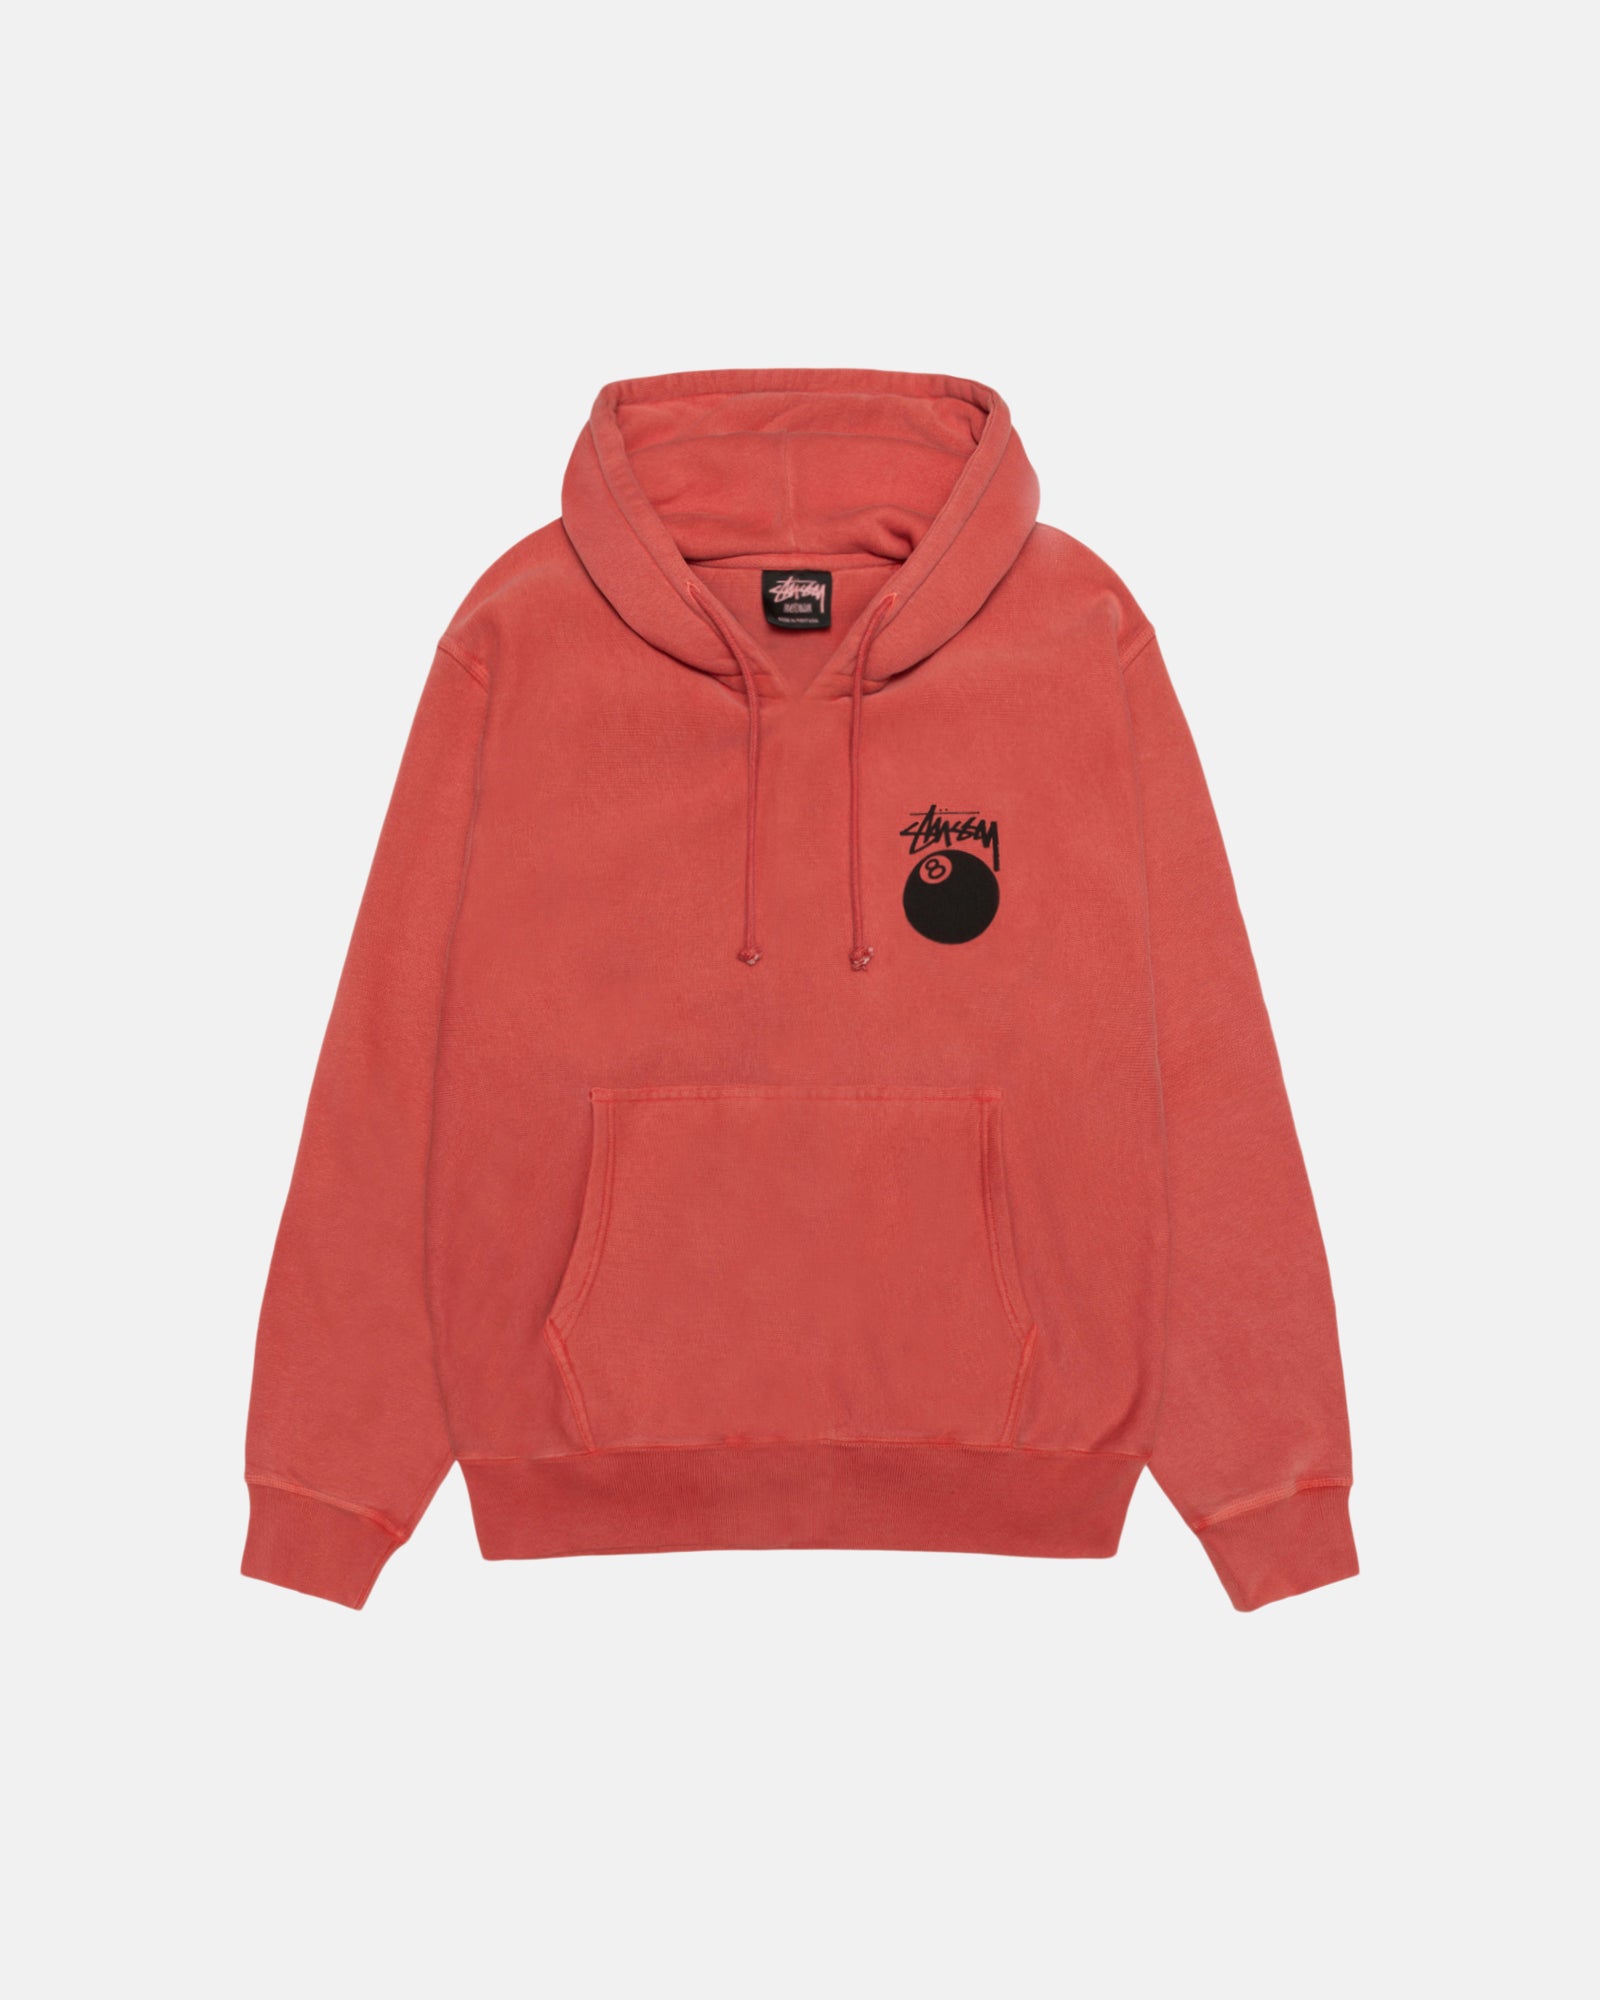 Shop all – Stüssy Europe – Page 2